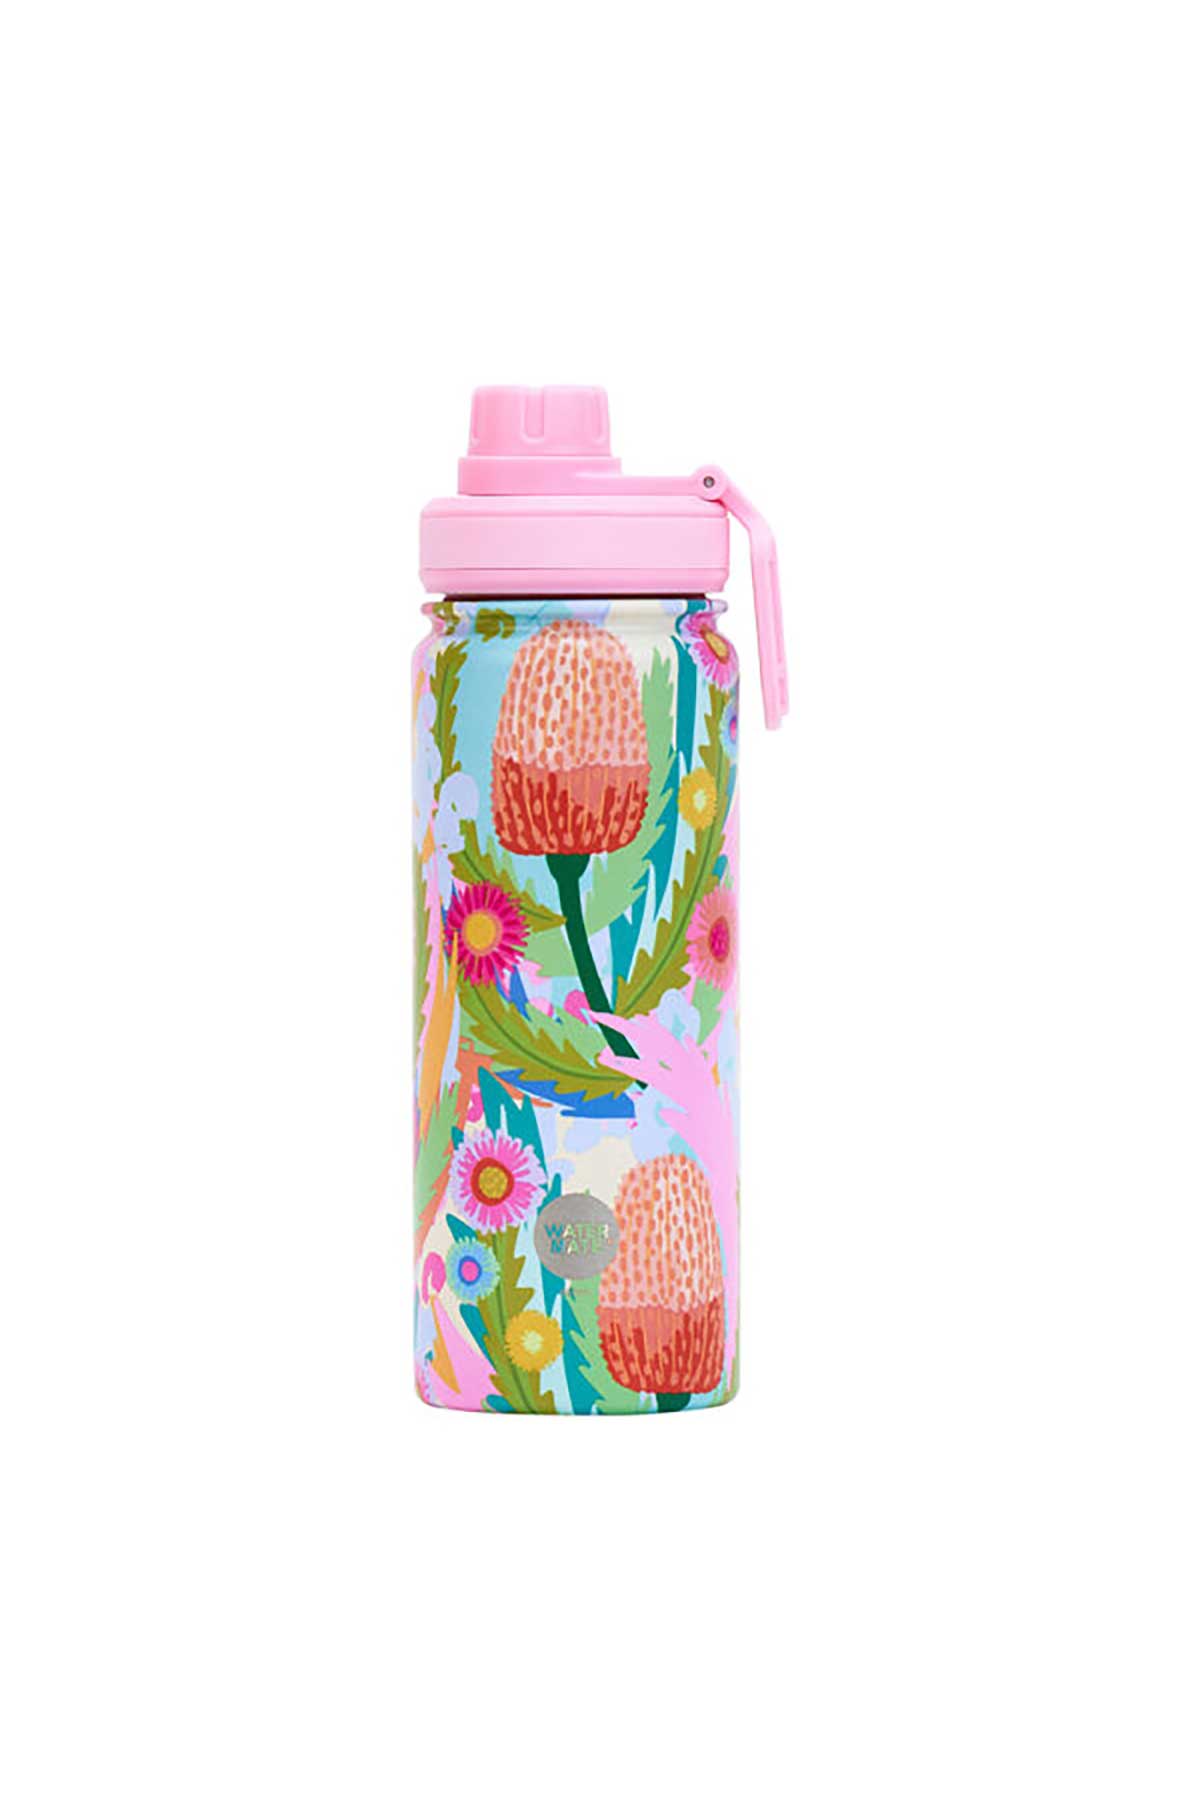 Watermate Stainless Water Bottle - Paper Daisy.